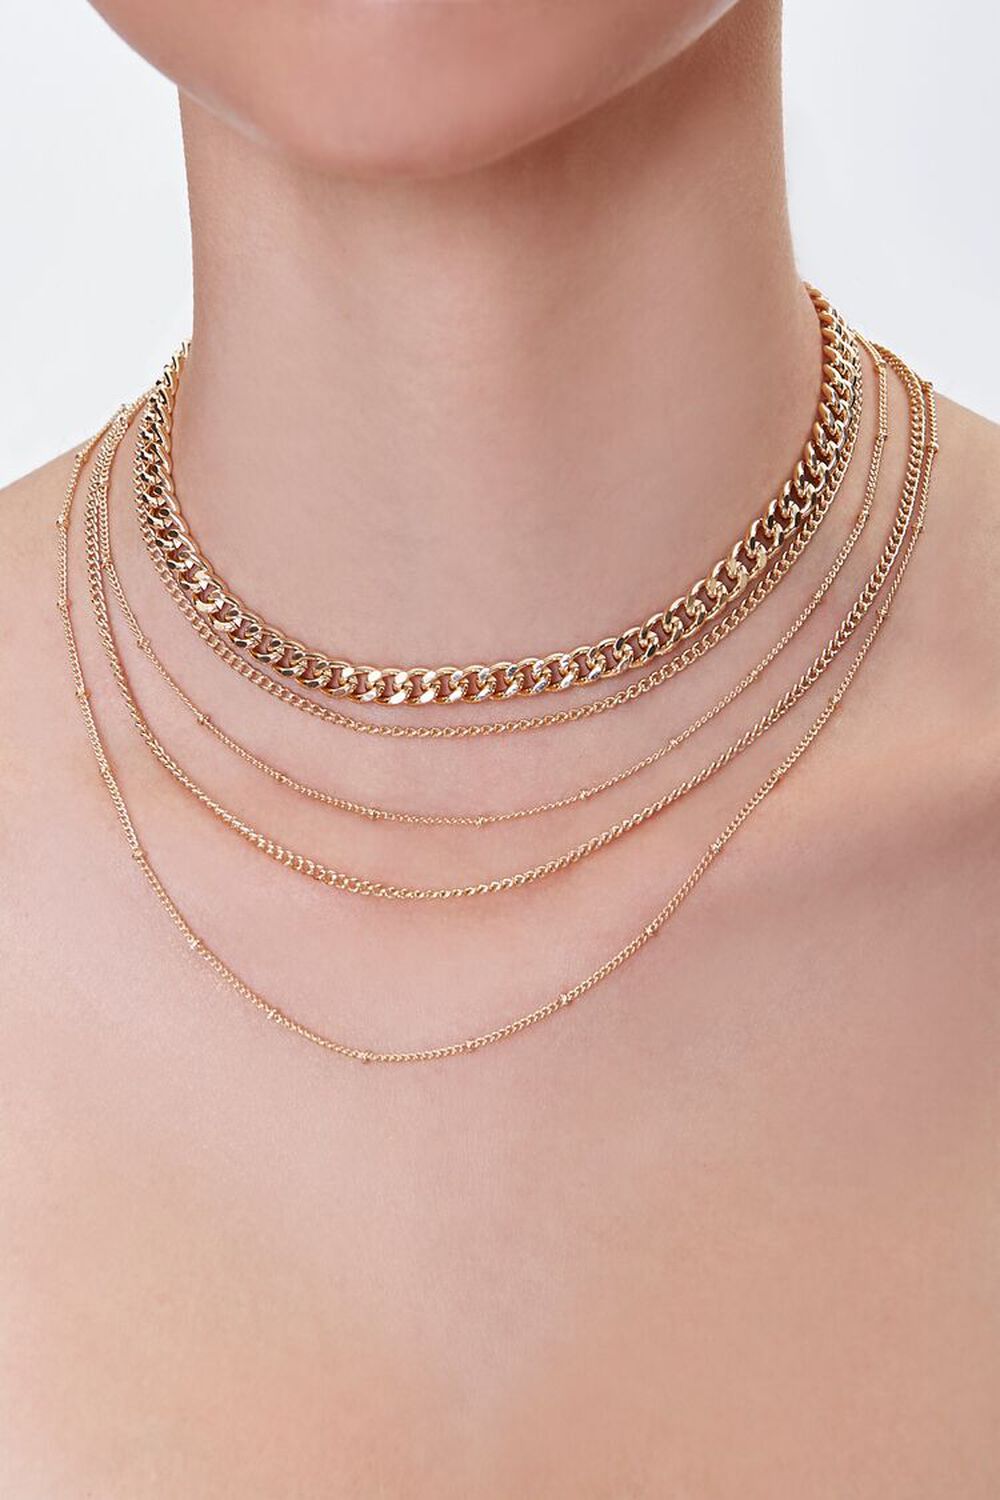 Curb Chain Layered Necklace, image 1